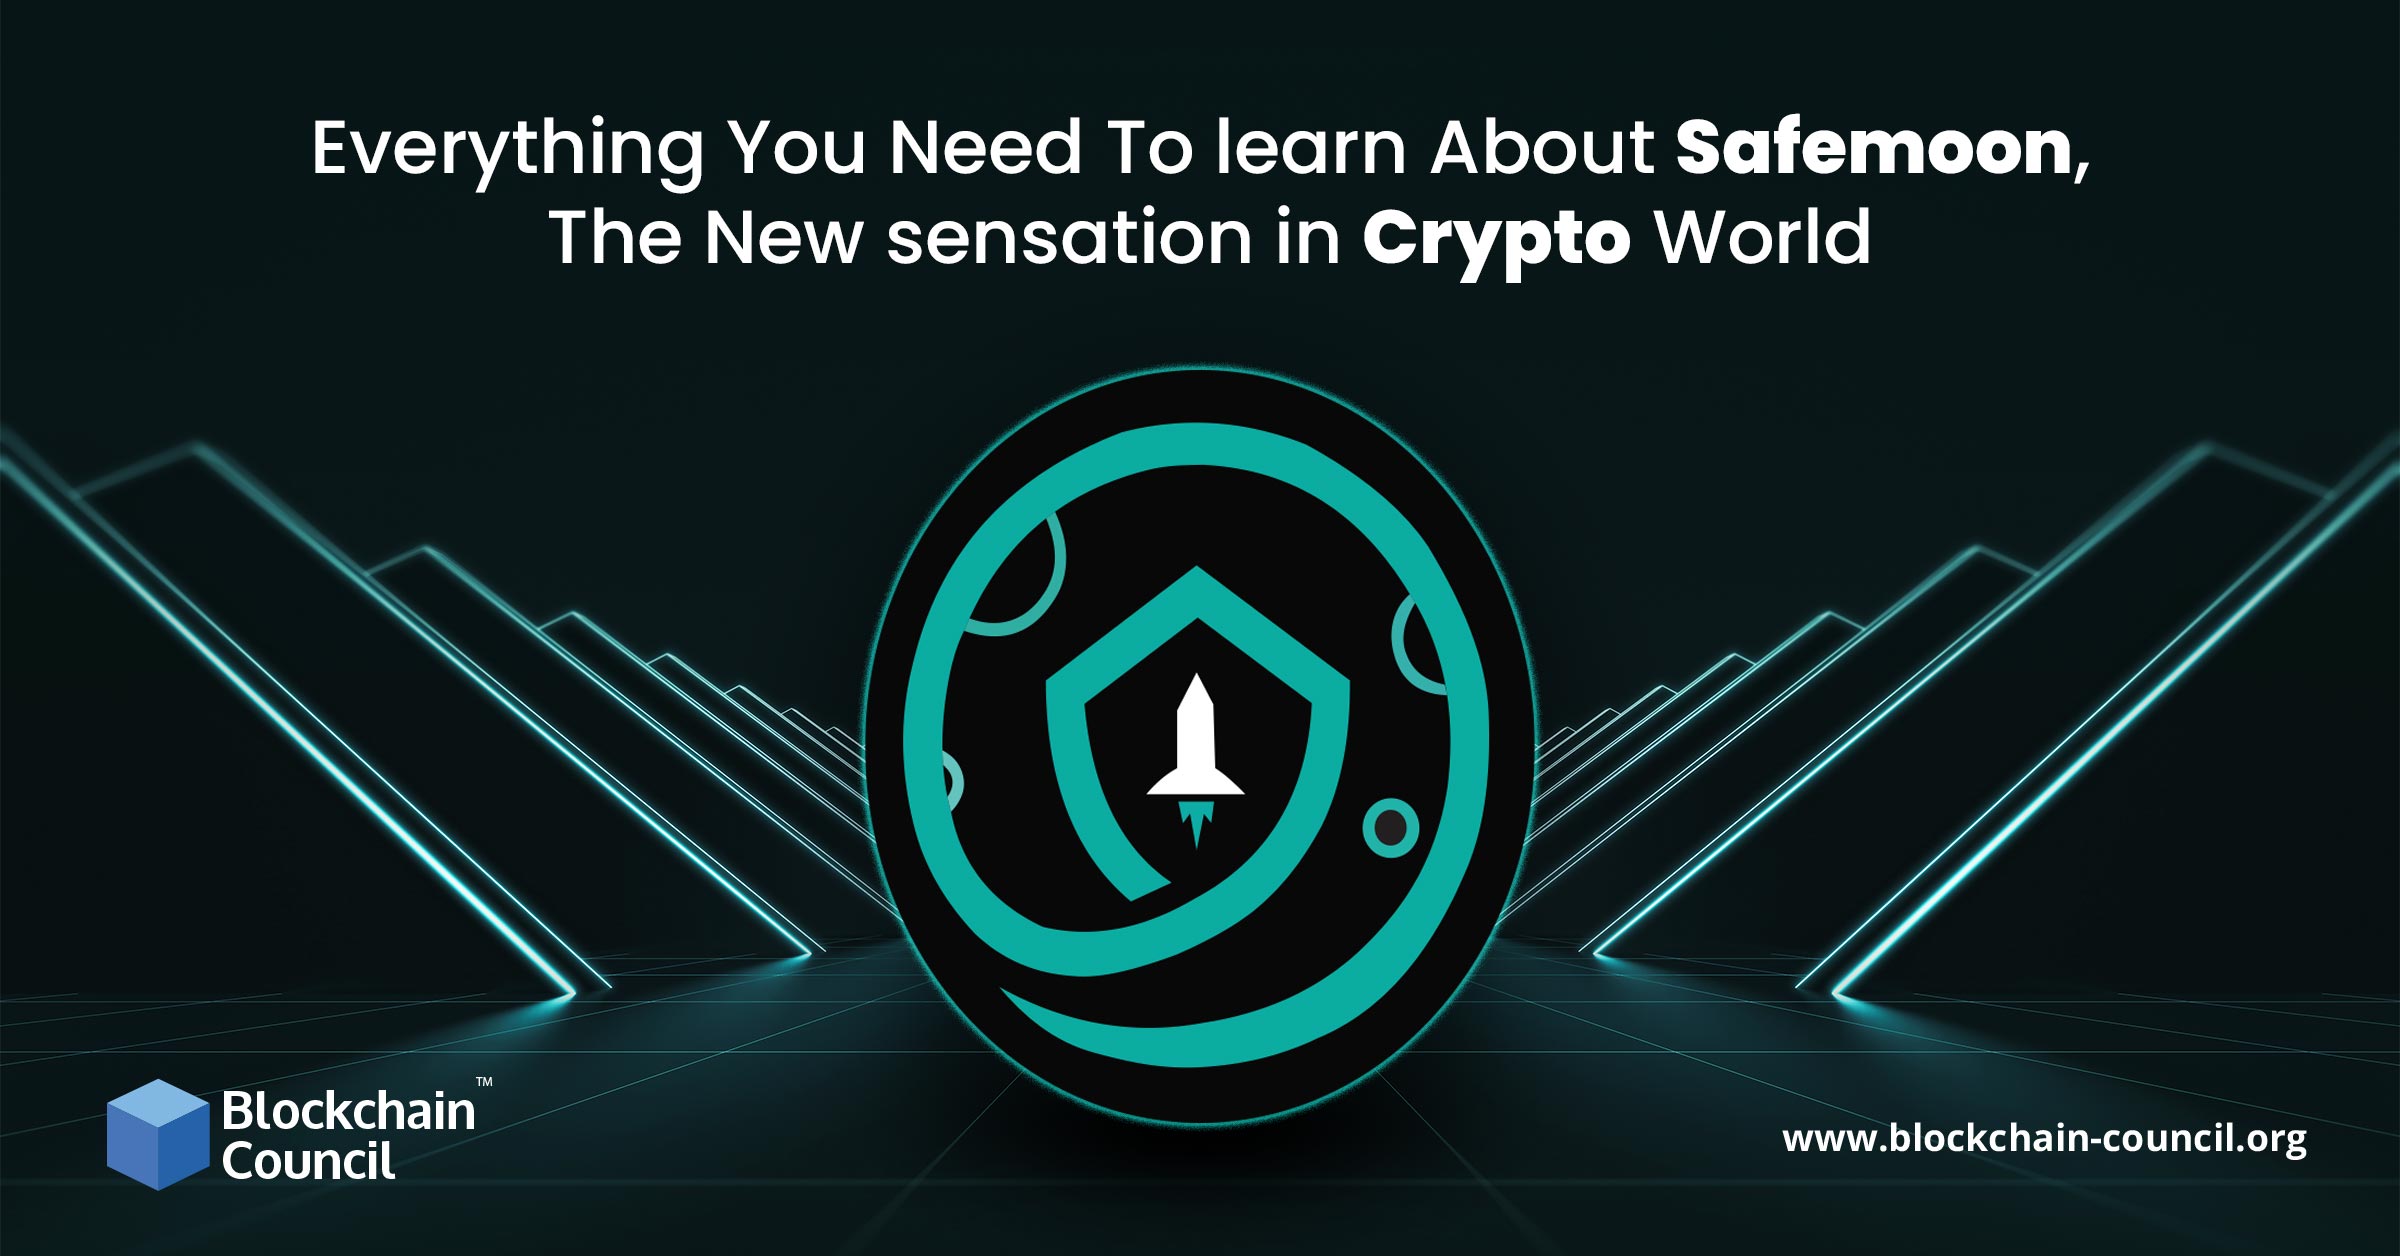 Everything You Need To learn About Safemoon, The New sensation in Crypto World